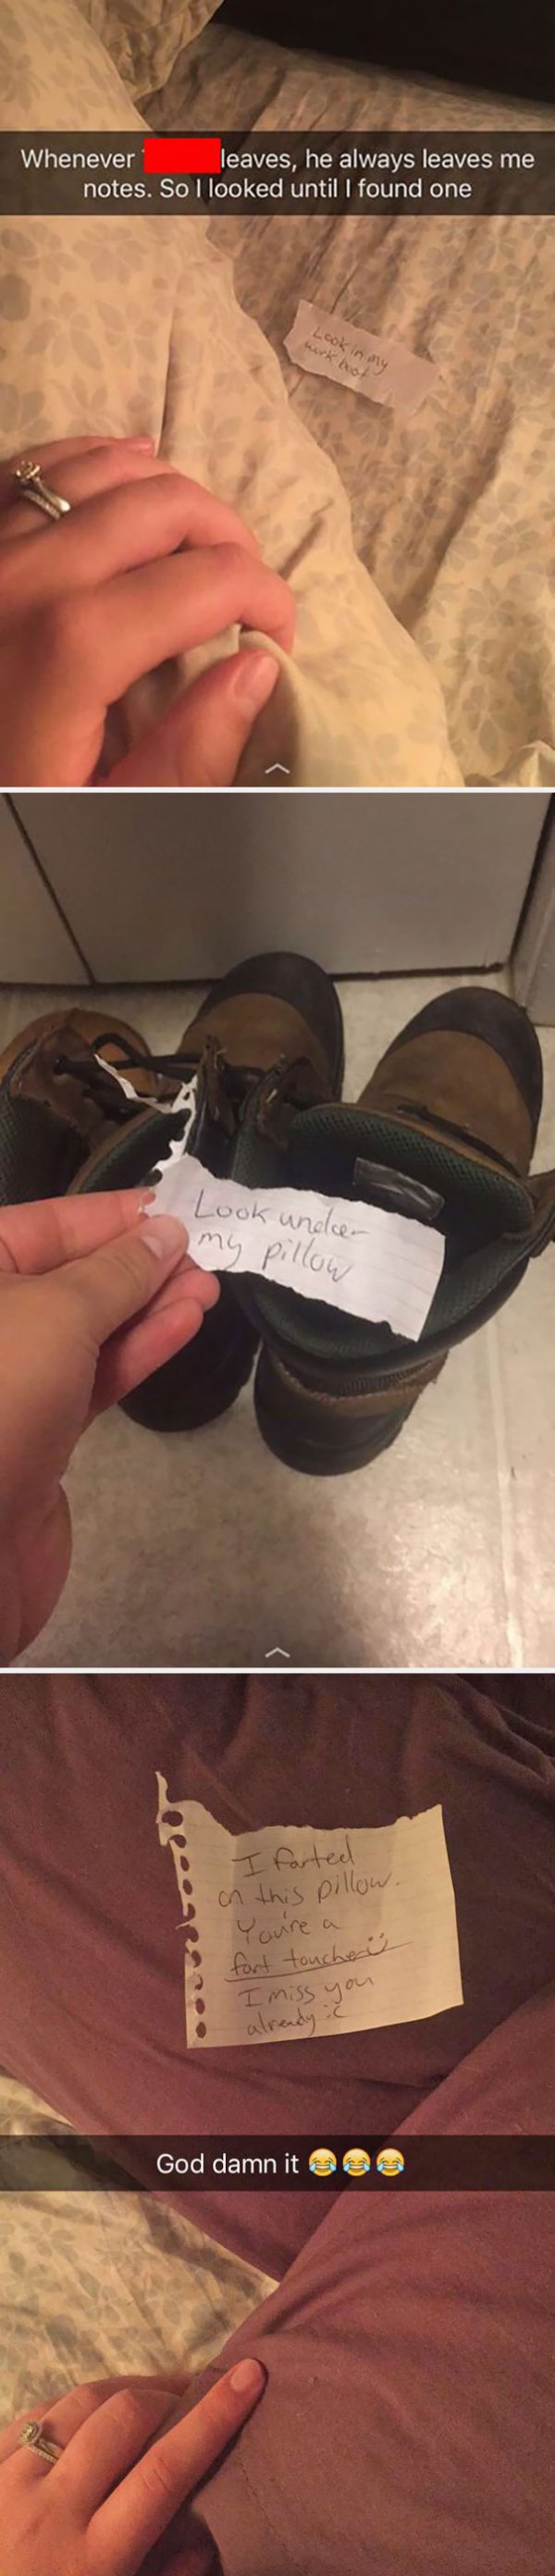 “My husband always leaves me notes when he has to leave town for work.”